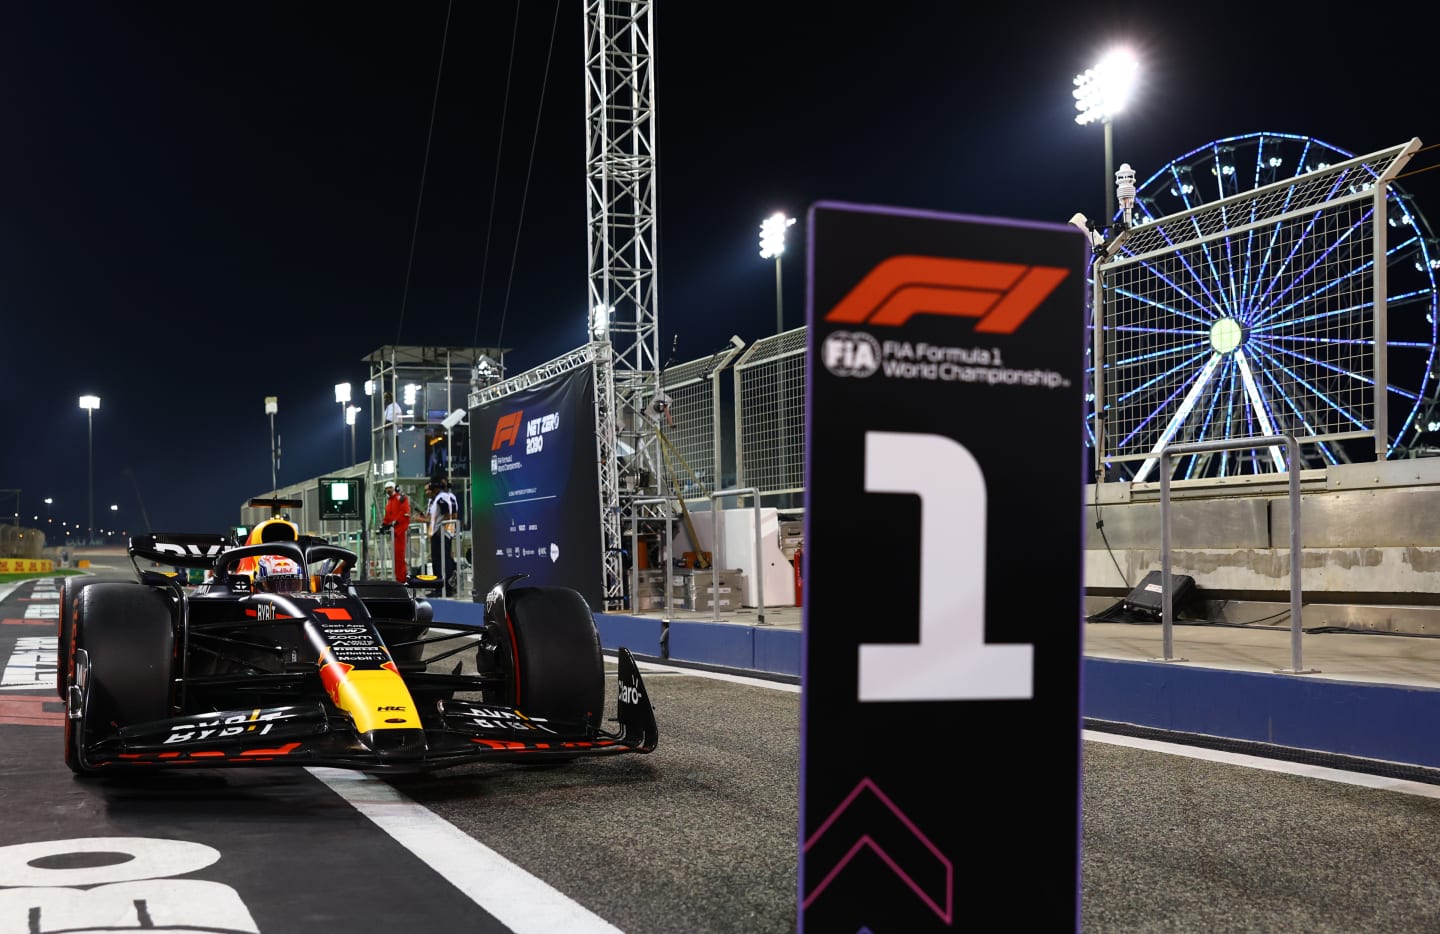 BAHRAIN, BAHRAIN - MARCH 04: Pole position qualifier Max Verstappen of the Netherlands driving the (1) Oracle Red Bull Racing RB19 stops in parc ferme during qualifying ahead of the F1 Grand Prix of Bahrain at Bahrain International Circuit on March 04, 2023 in Bahrain, Bahrain. (Photo by Mark Thompson/Getty Images)